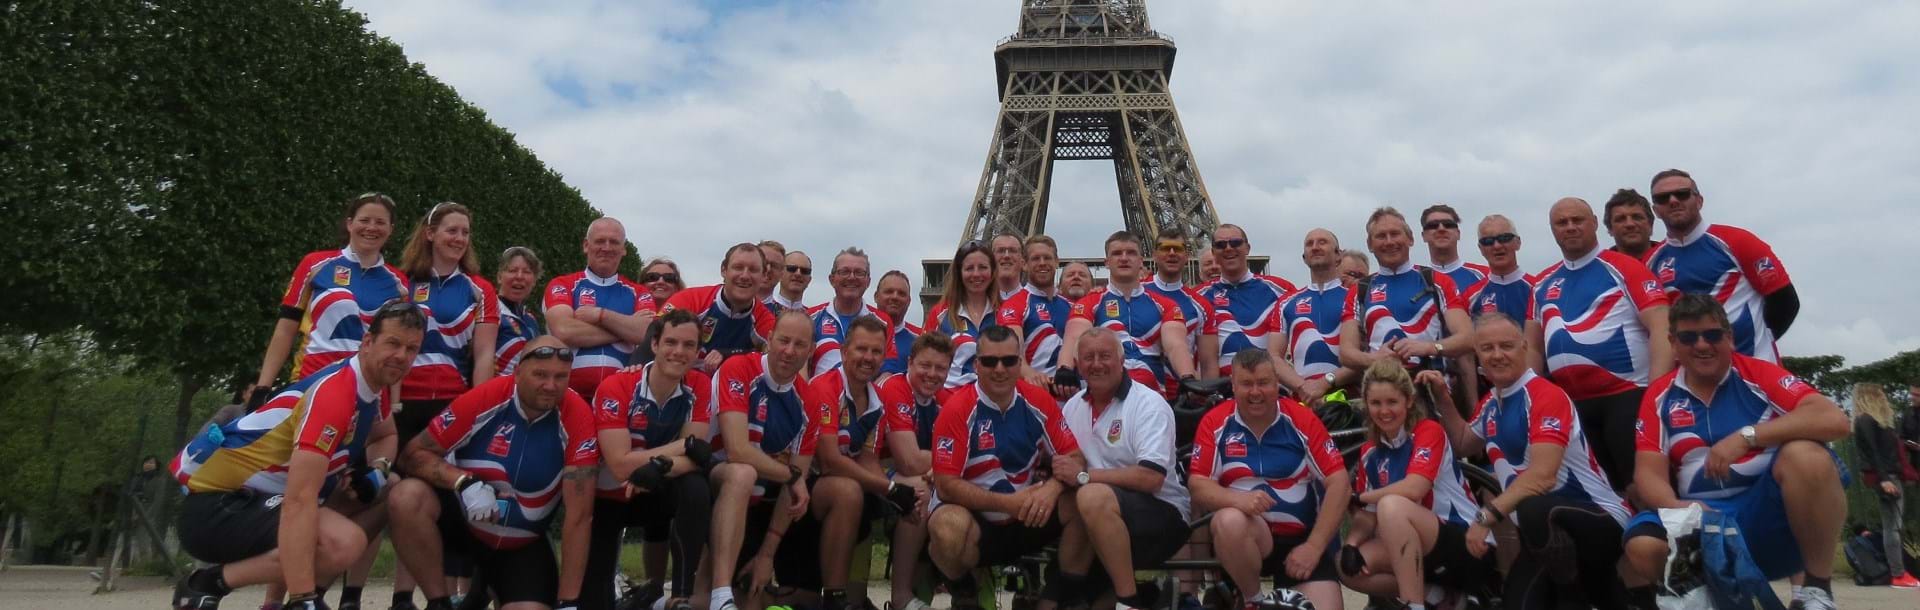 A  large group of blind veterans and charity supporters wearing Blind Veteran UK cycling vests as they pose in front of the Eiffel Tower